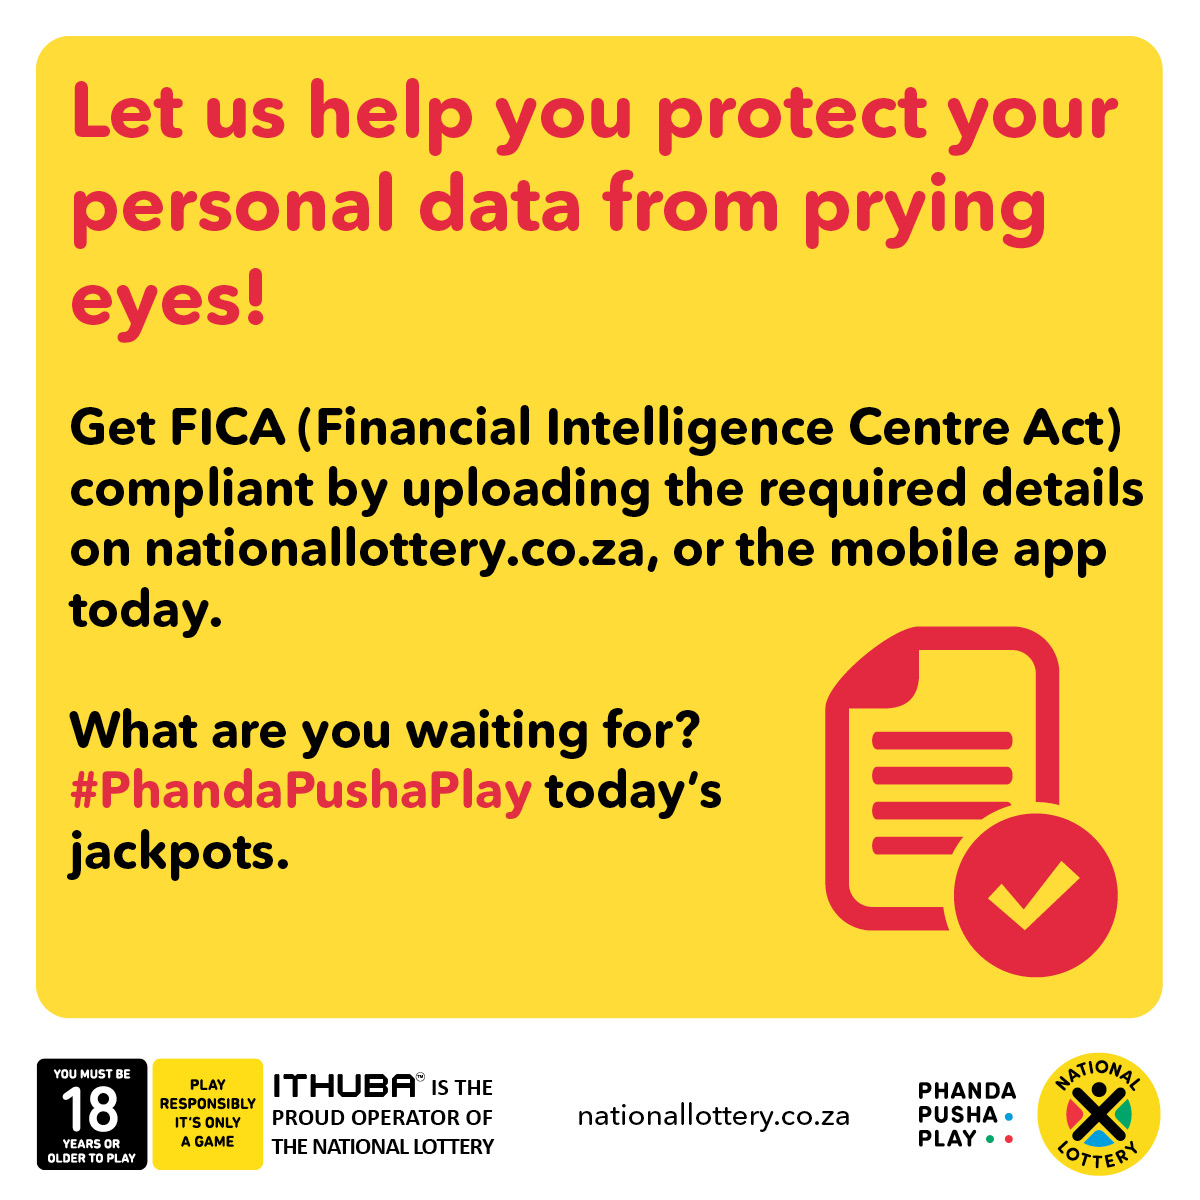 Let us help you protect your personal data from prying eyes! Get FICA (Financial Intelligence Centre Act) compliant by uploading the required details on nationallottery.co.za, or the mobile app today. What are you waiting for? #PhandaPushaPlay today’s jackpots.